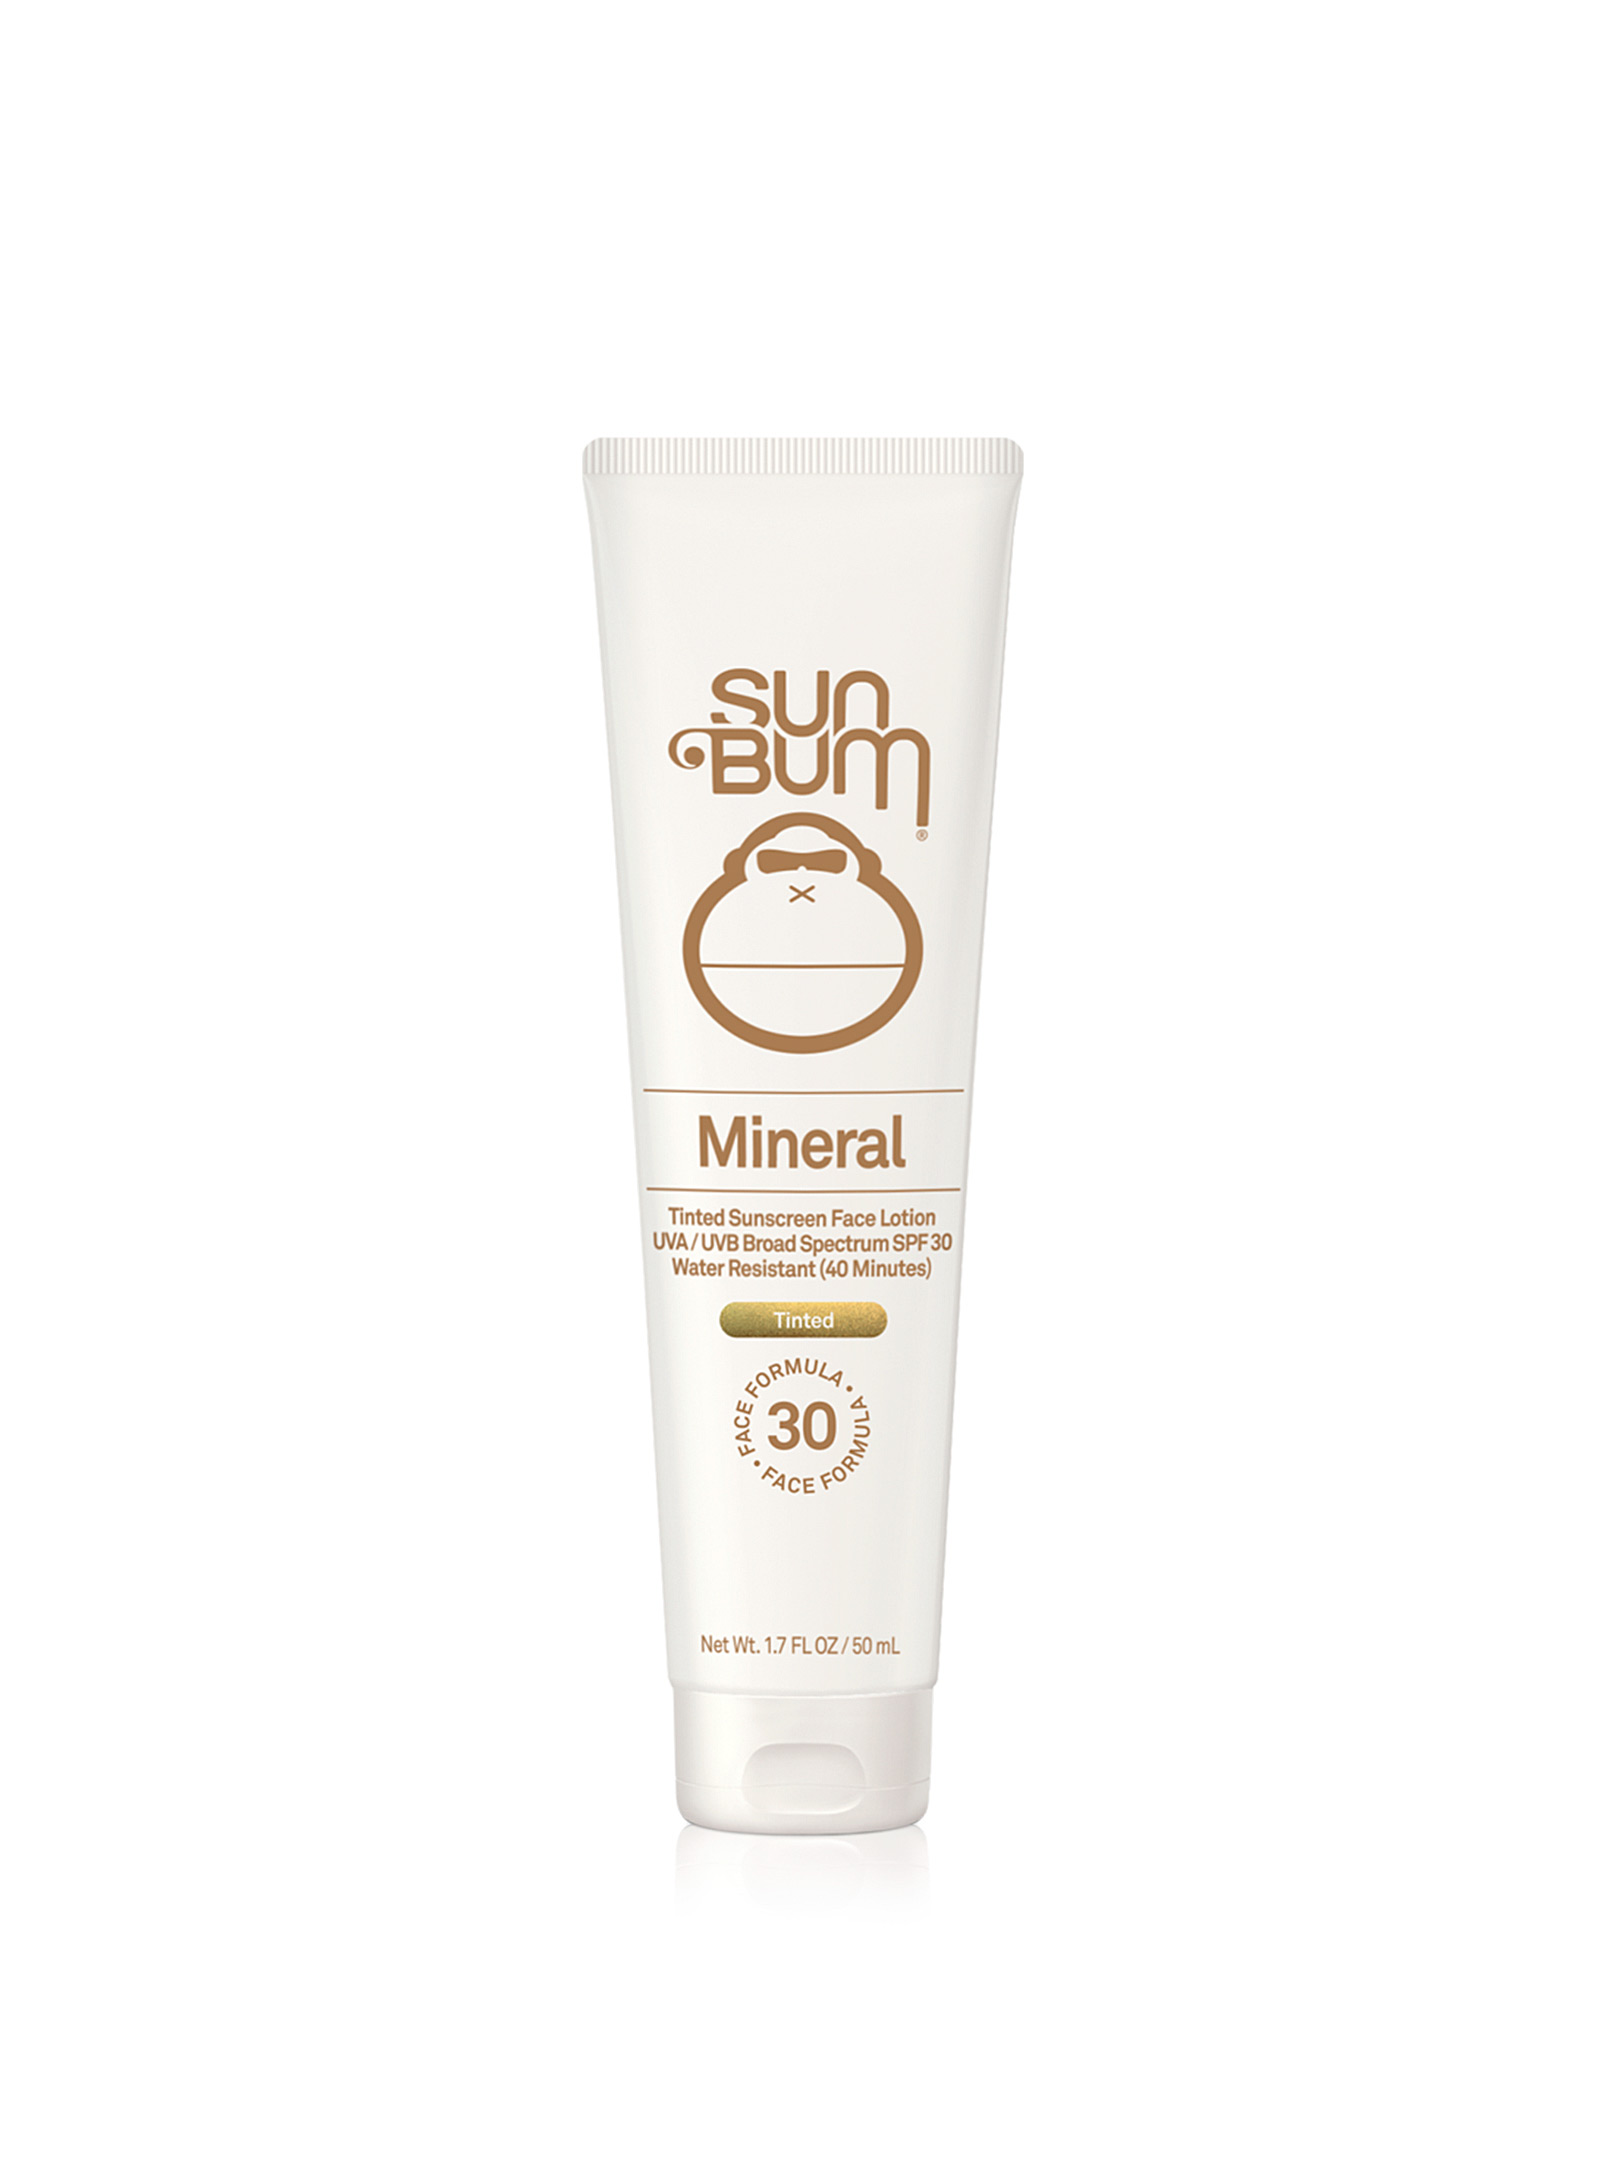 Sun Bum Mineral Spf 30 Tinted Sunscreen Face Lotion In White